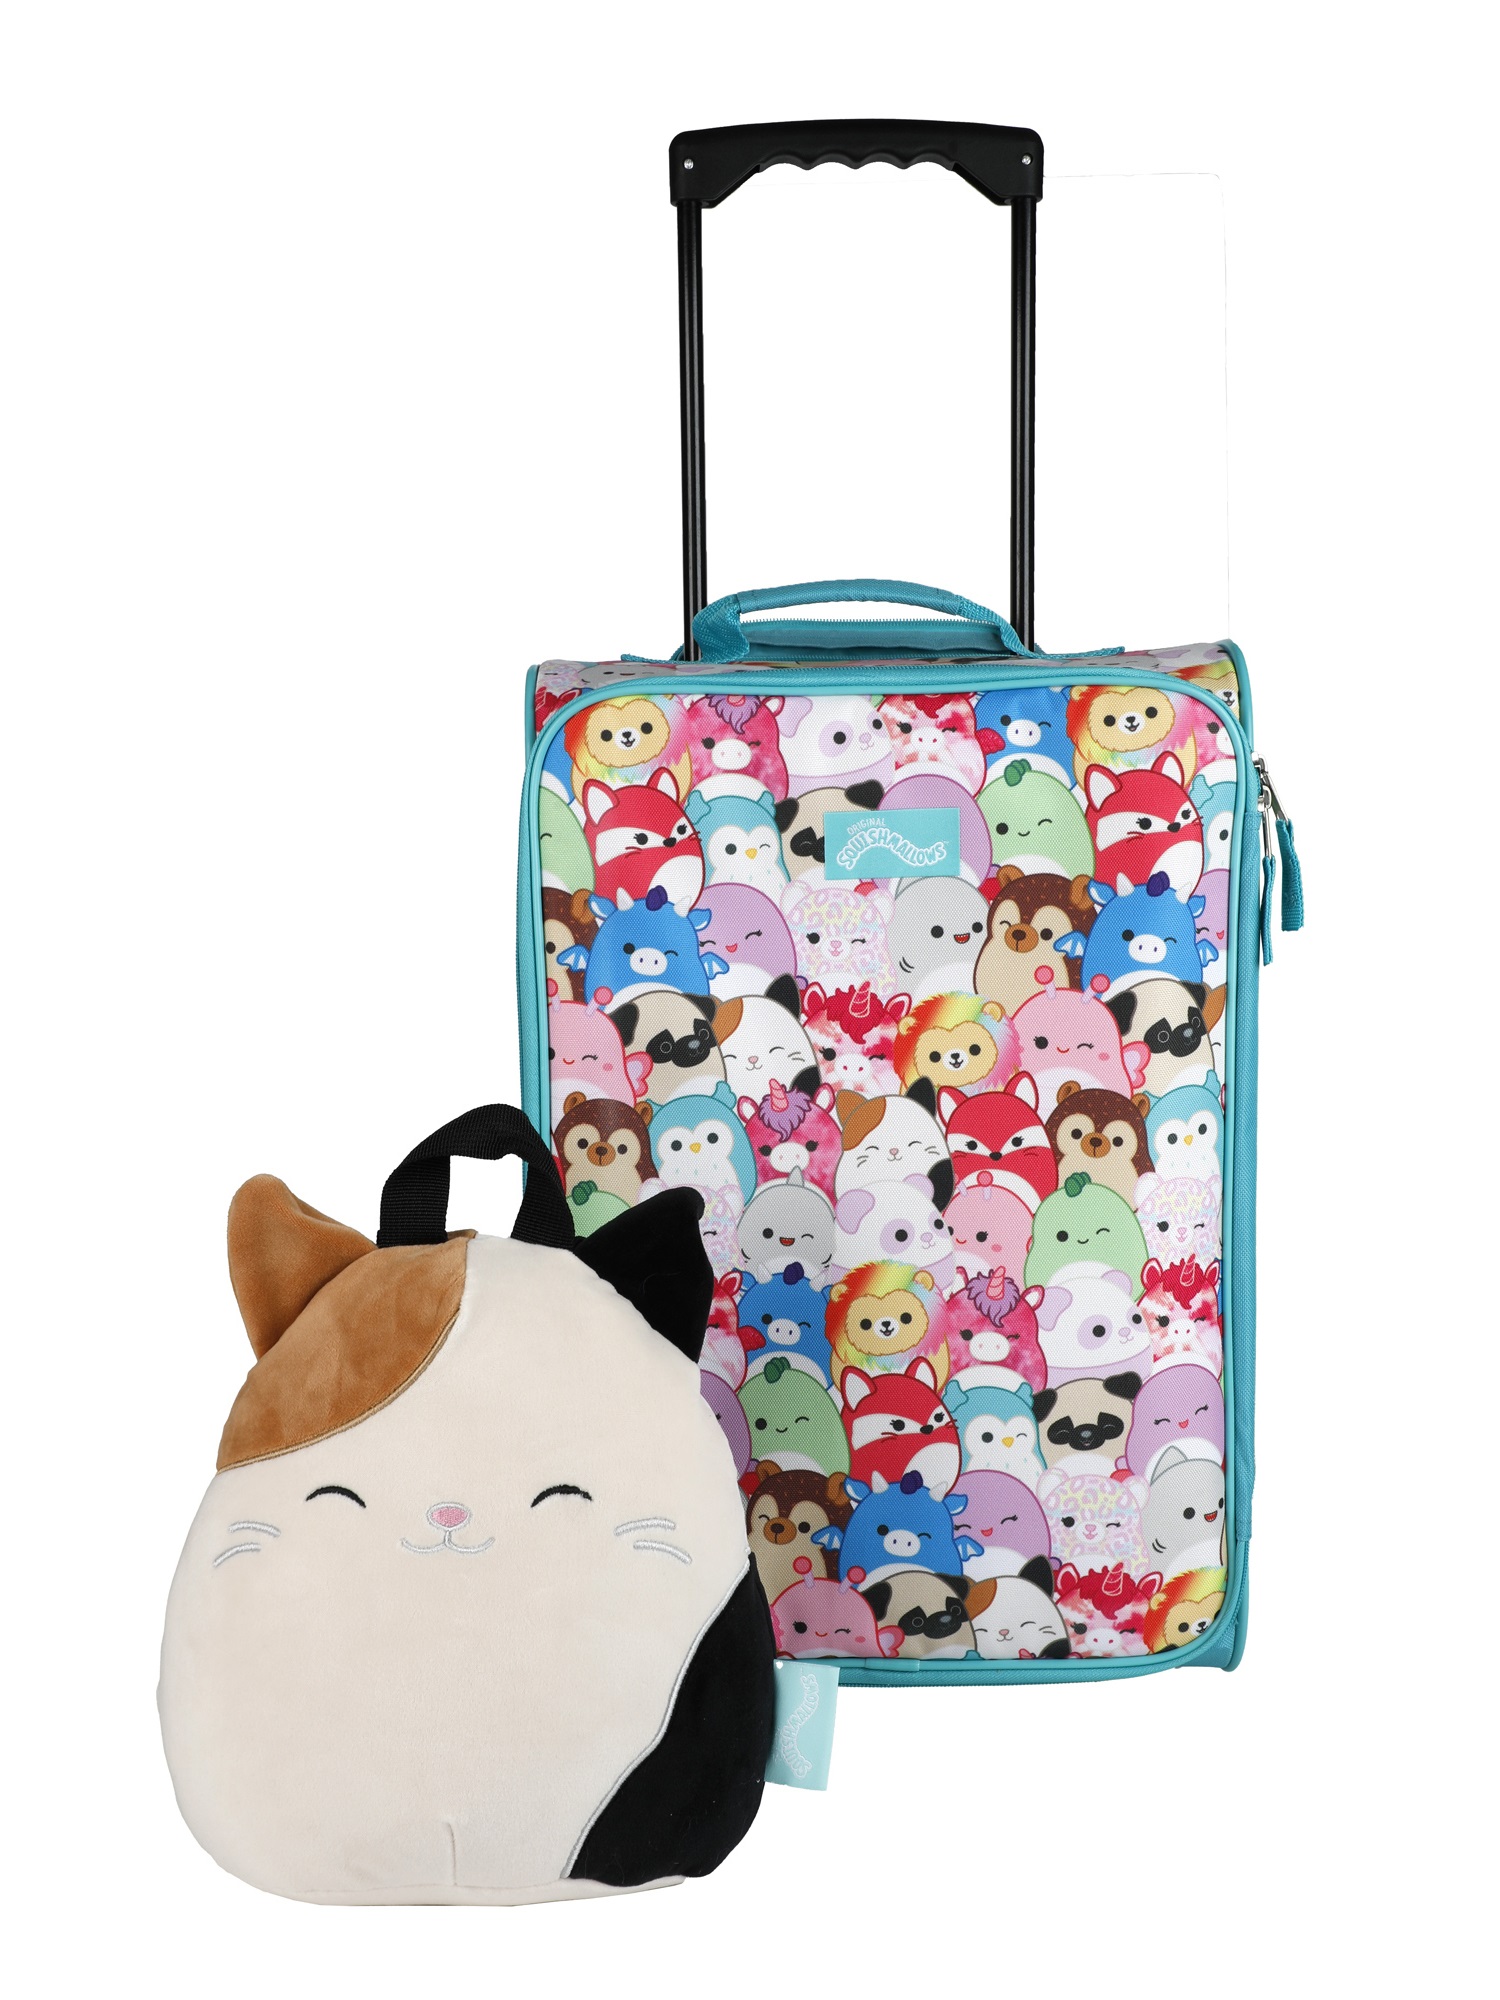 Squishmallows Cameron Cat 2pc  Travel Set with 18" Luggage and 10" Plush Backpack - image 1 of 9